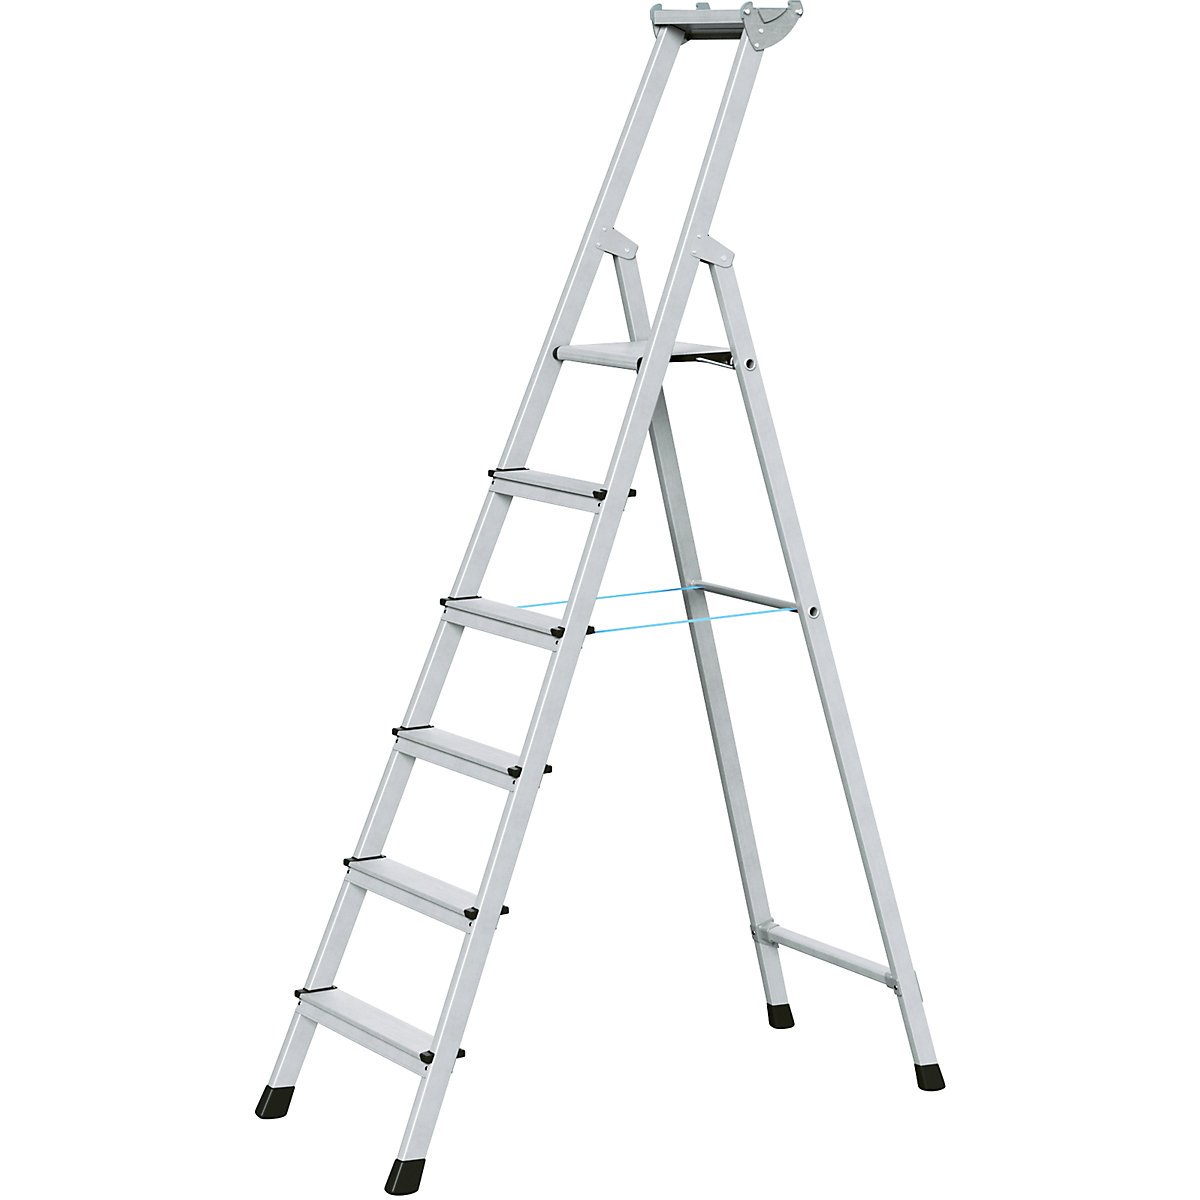 Professional step ladder, single sided access – ZARGES, anodised aluminium, with tool tray, for workshop and industrial use, 6 steps inclusive platforms-6